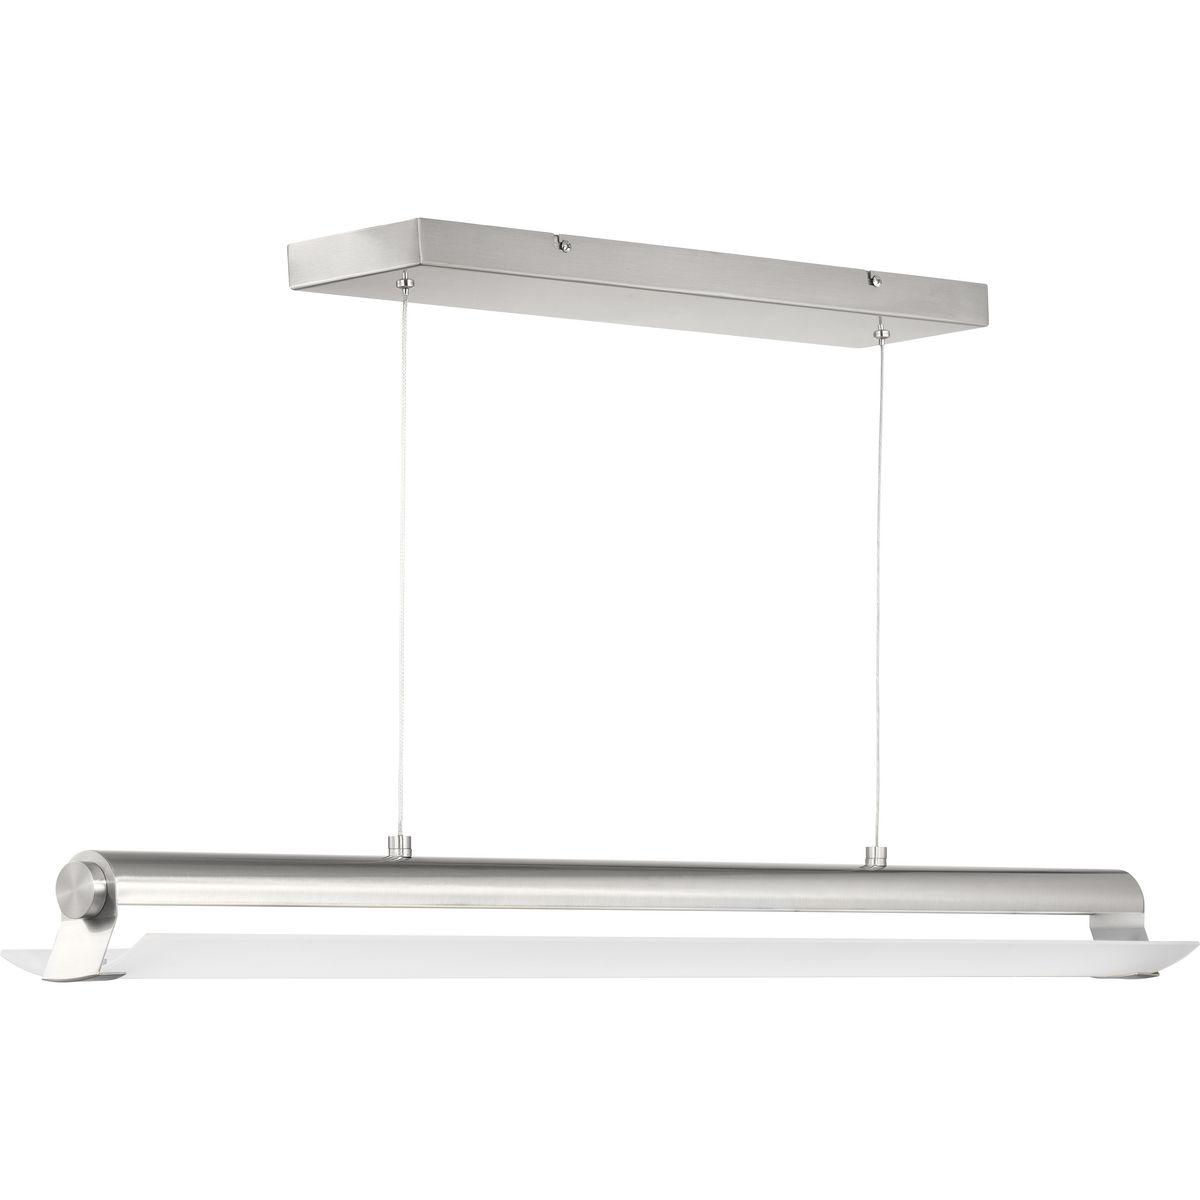 Hubbell P500002-009-30 The Concourse LED linear pendant features minimalist design styling and a slim profile that appears to float across the ceiling. Offering energy efficiency and low maintenance benefits, Concourse LED is suitable for both home and commercial applications p